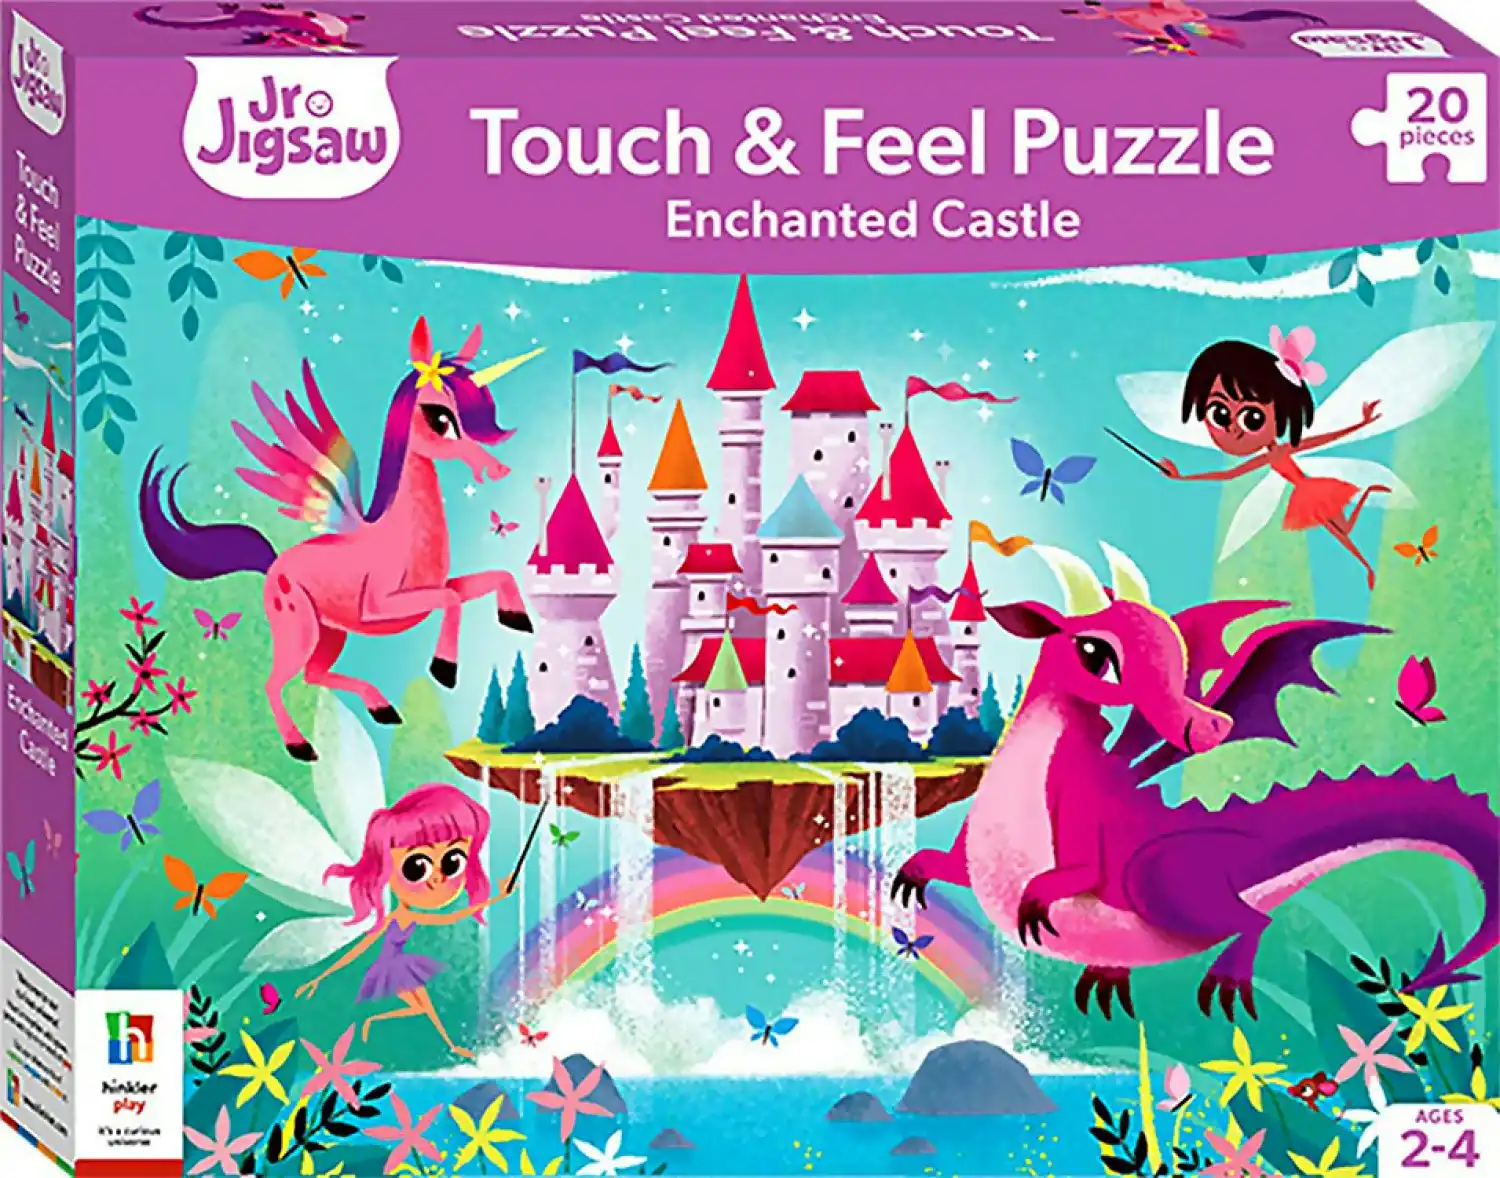 Enchanted Castle JR JIGSAW Puzzle - Touch And Feel